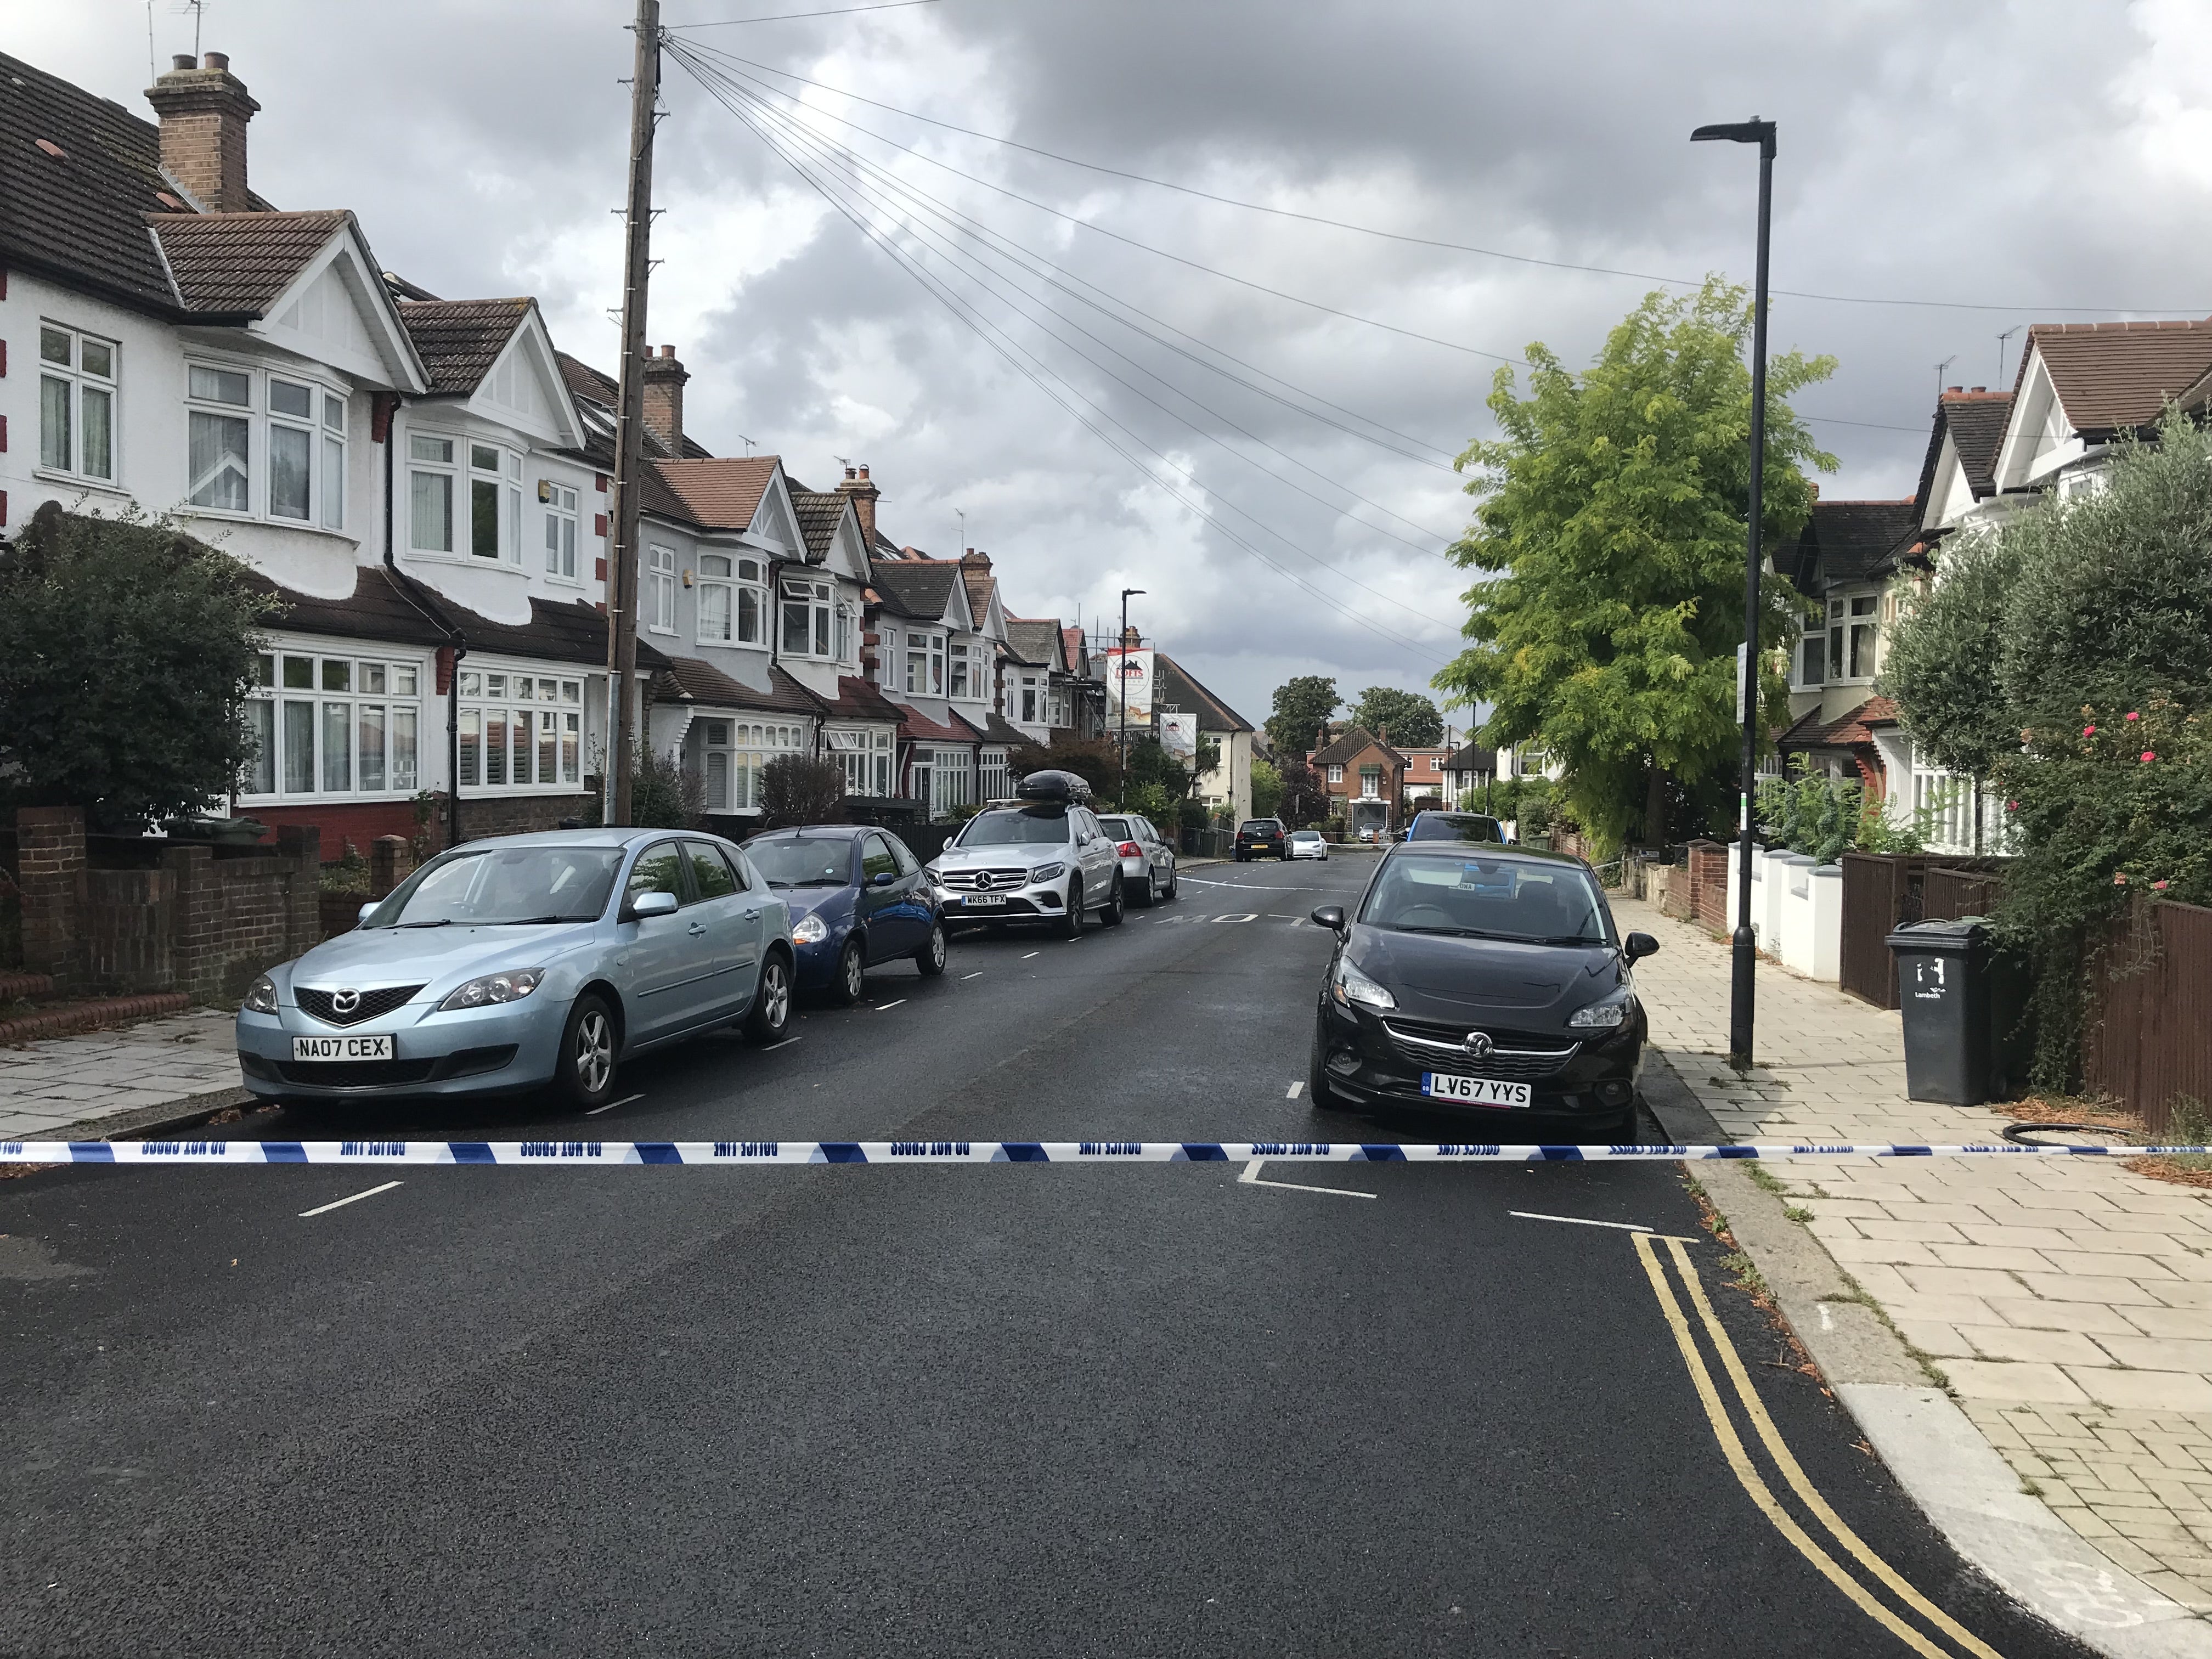 Chris Kaba died after a police chase that ended in Streatham Hill, south London , on Monday night